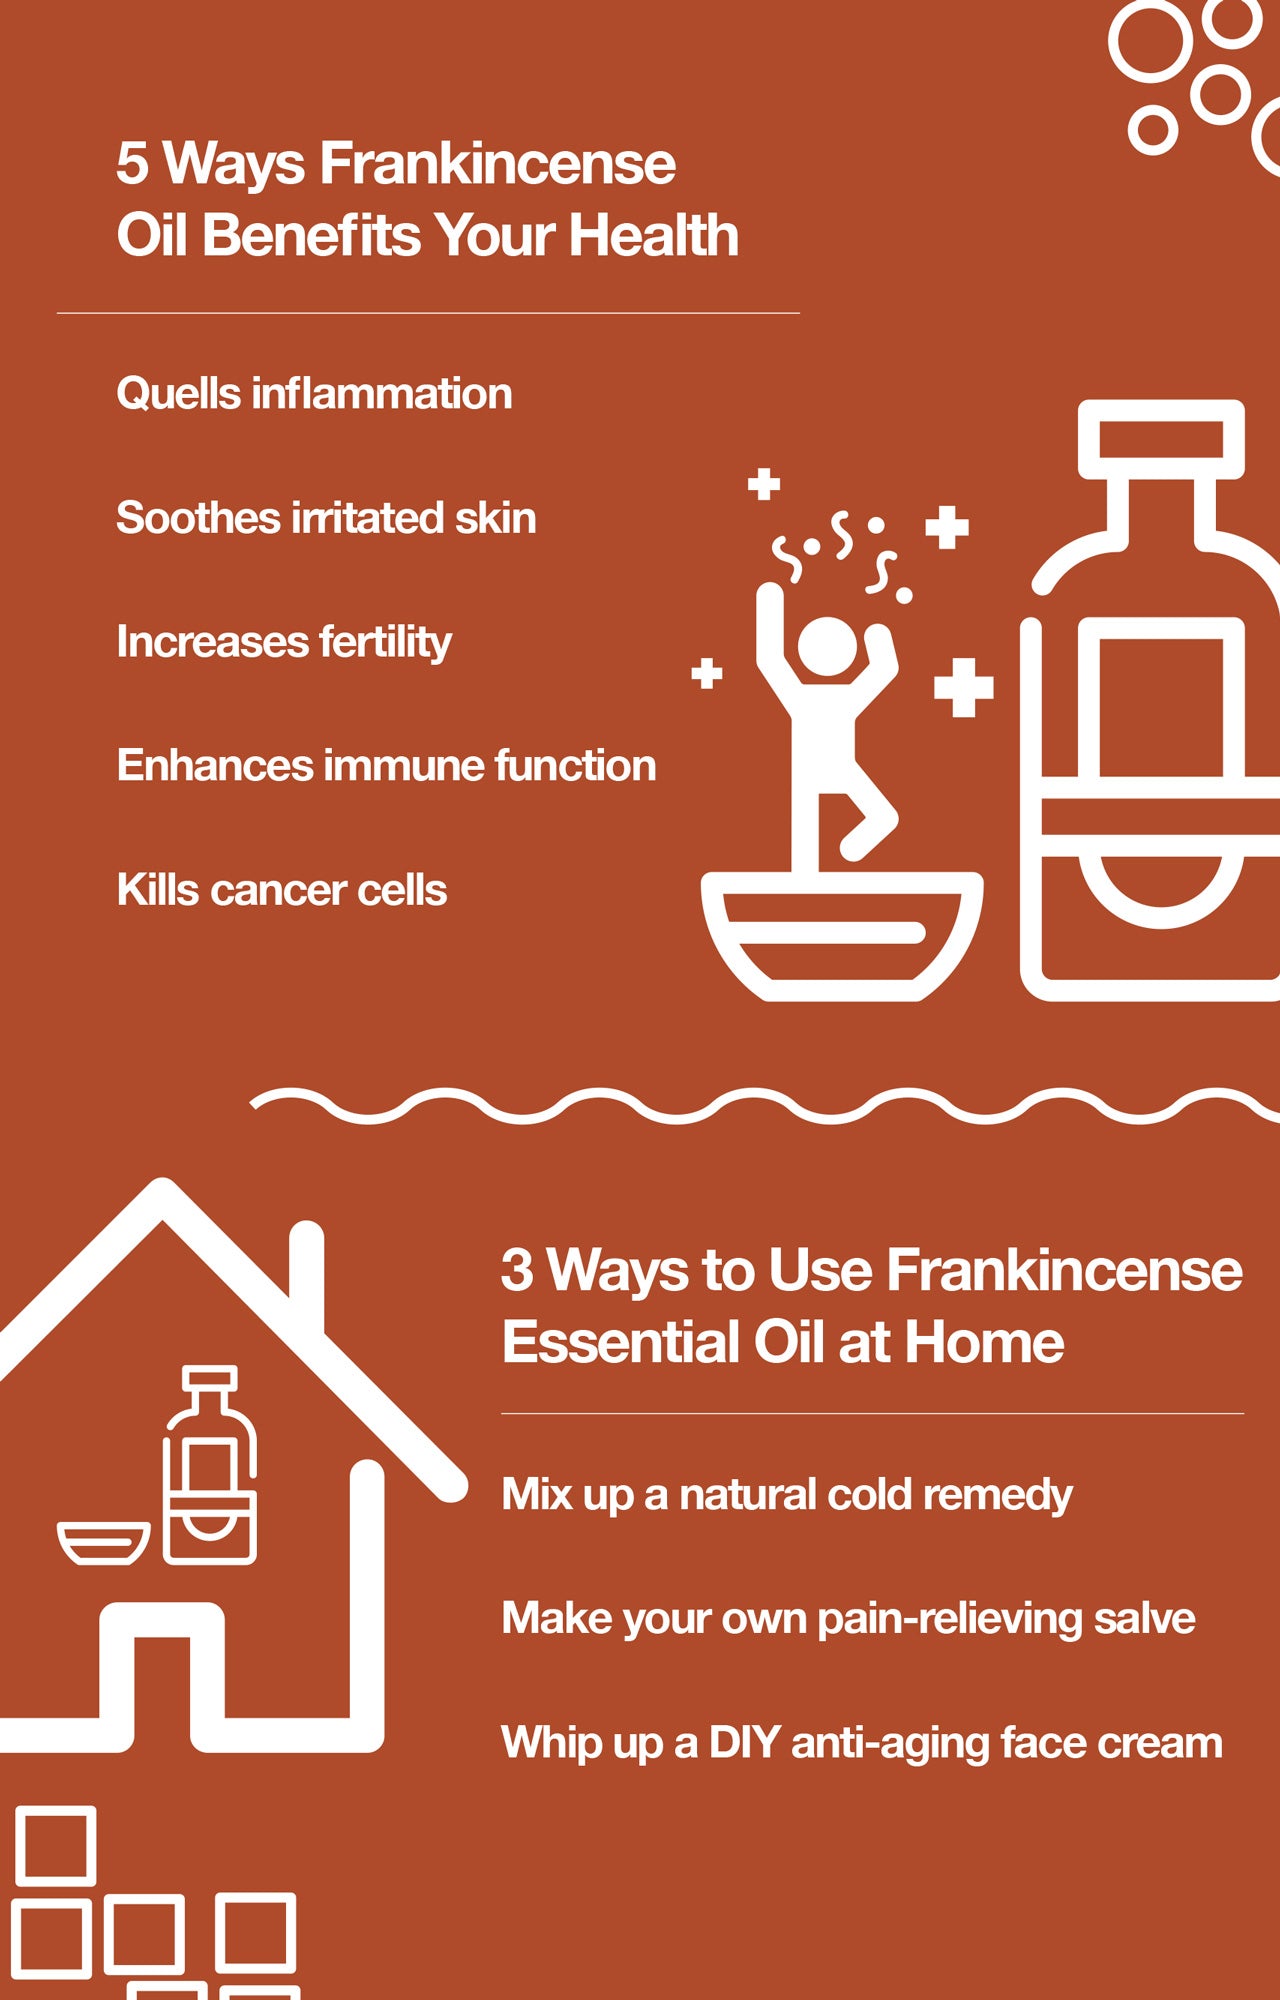 5 Ways Frankincense Oil Benefits Your Health